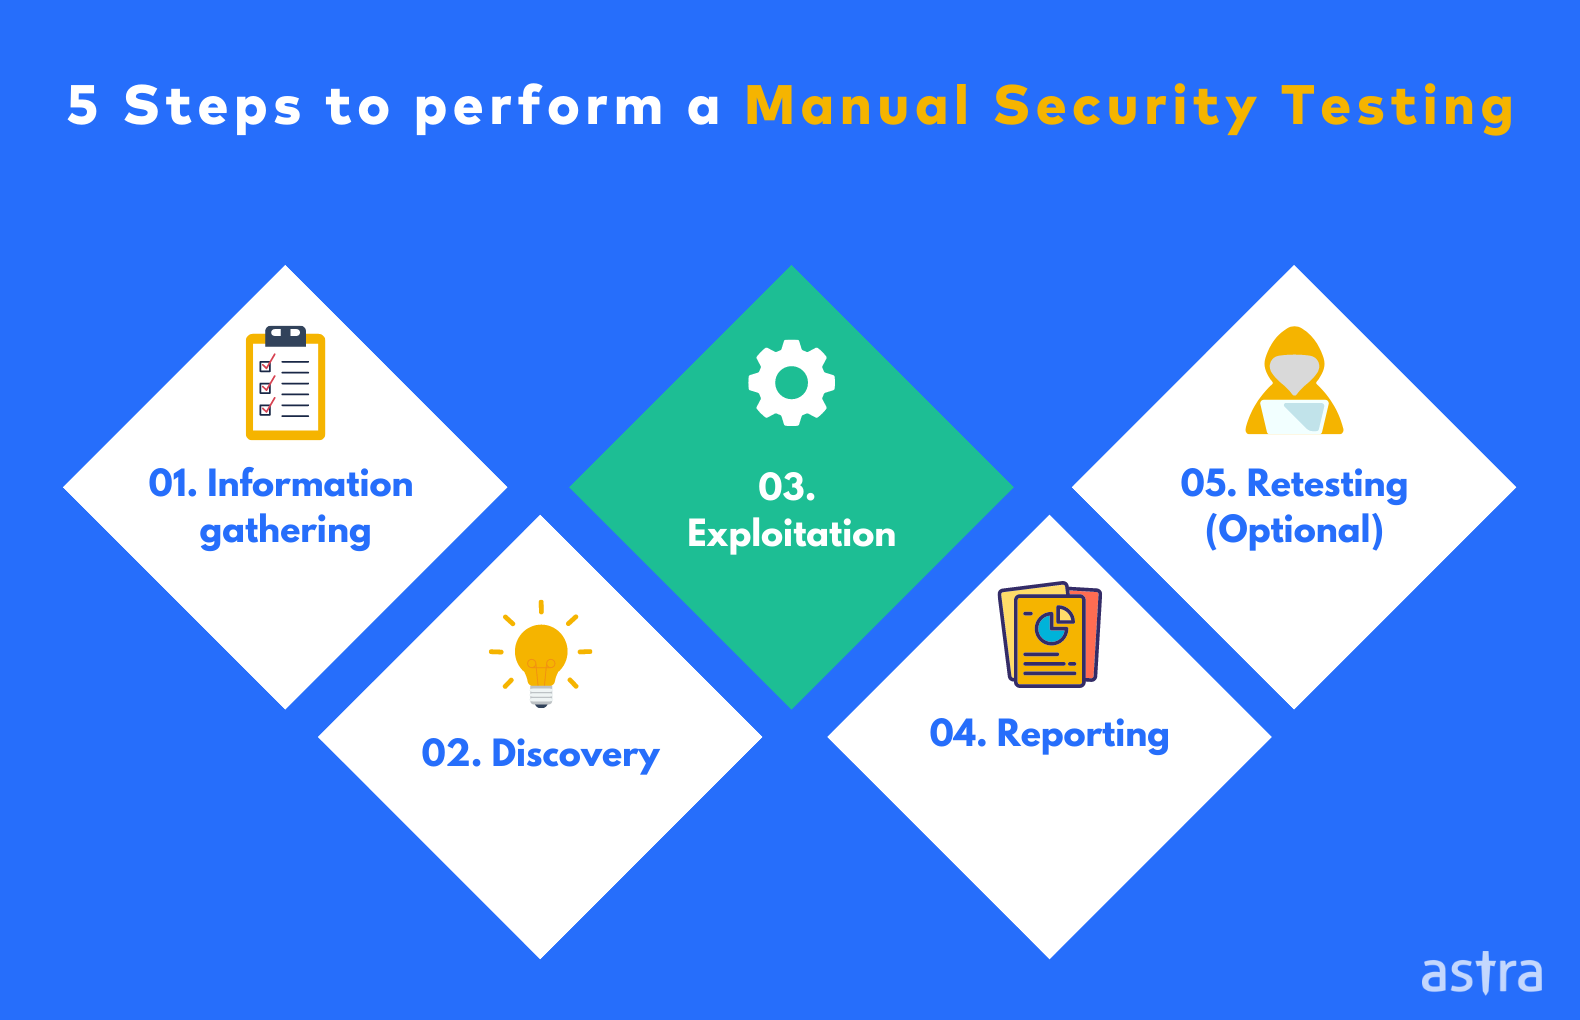 How Manual Security is performed?